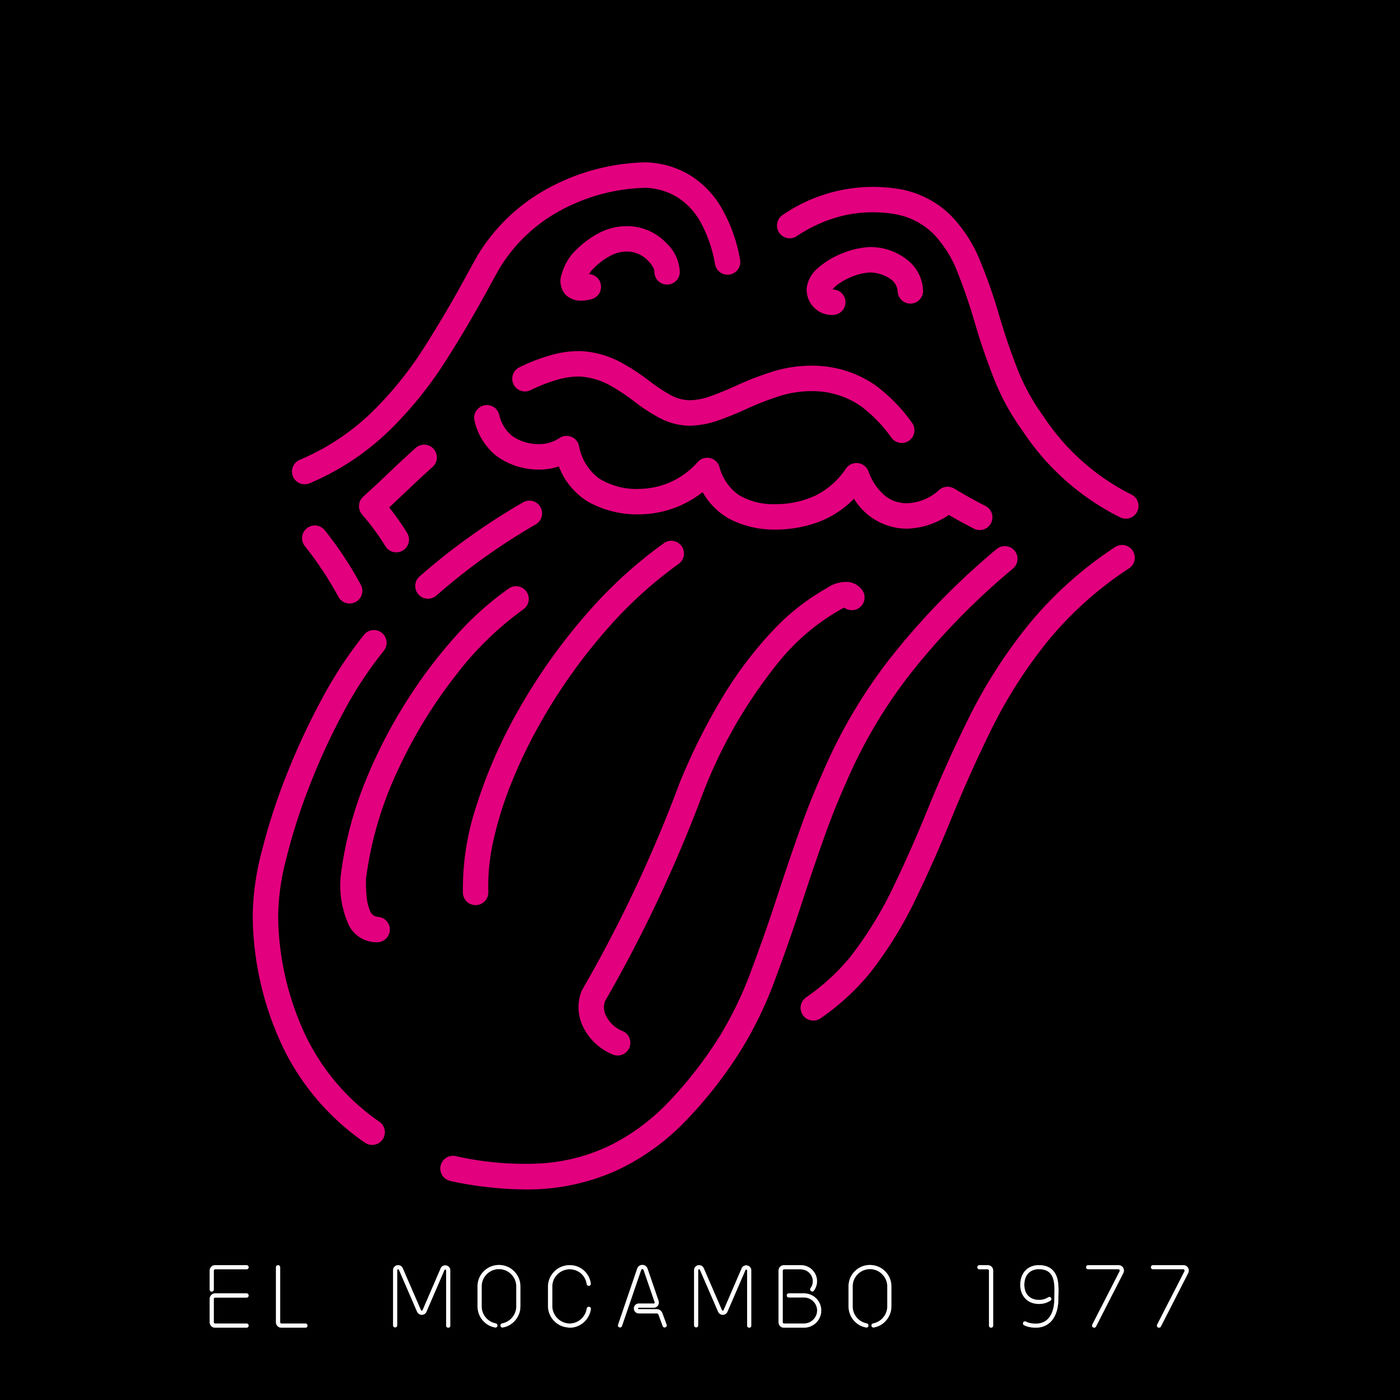 The Rolling Stones – It’s Only Rock ’N’ Roll (But I Like It) / Rip This Joint (Live At The El Mocambo 1977 / Single) (2022) [Official Digital Download 24bit/96kHz]